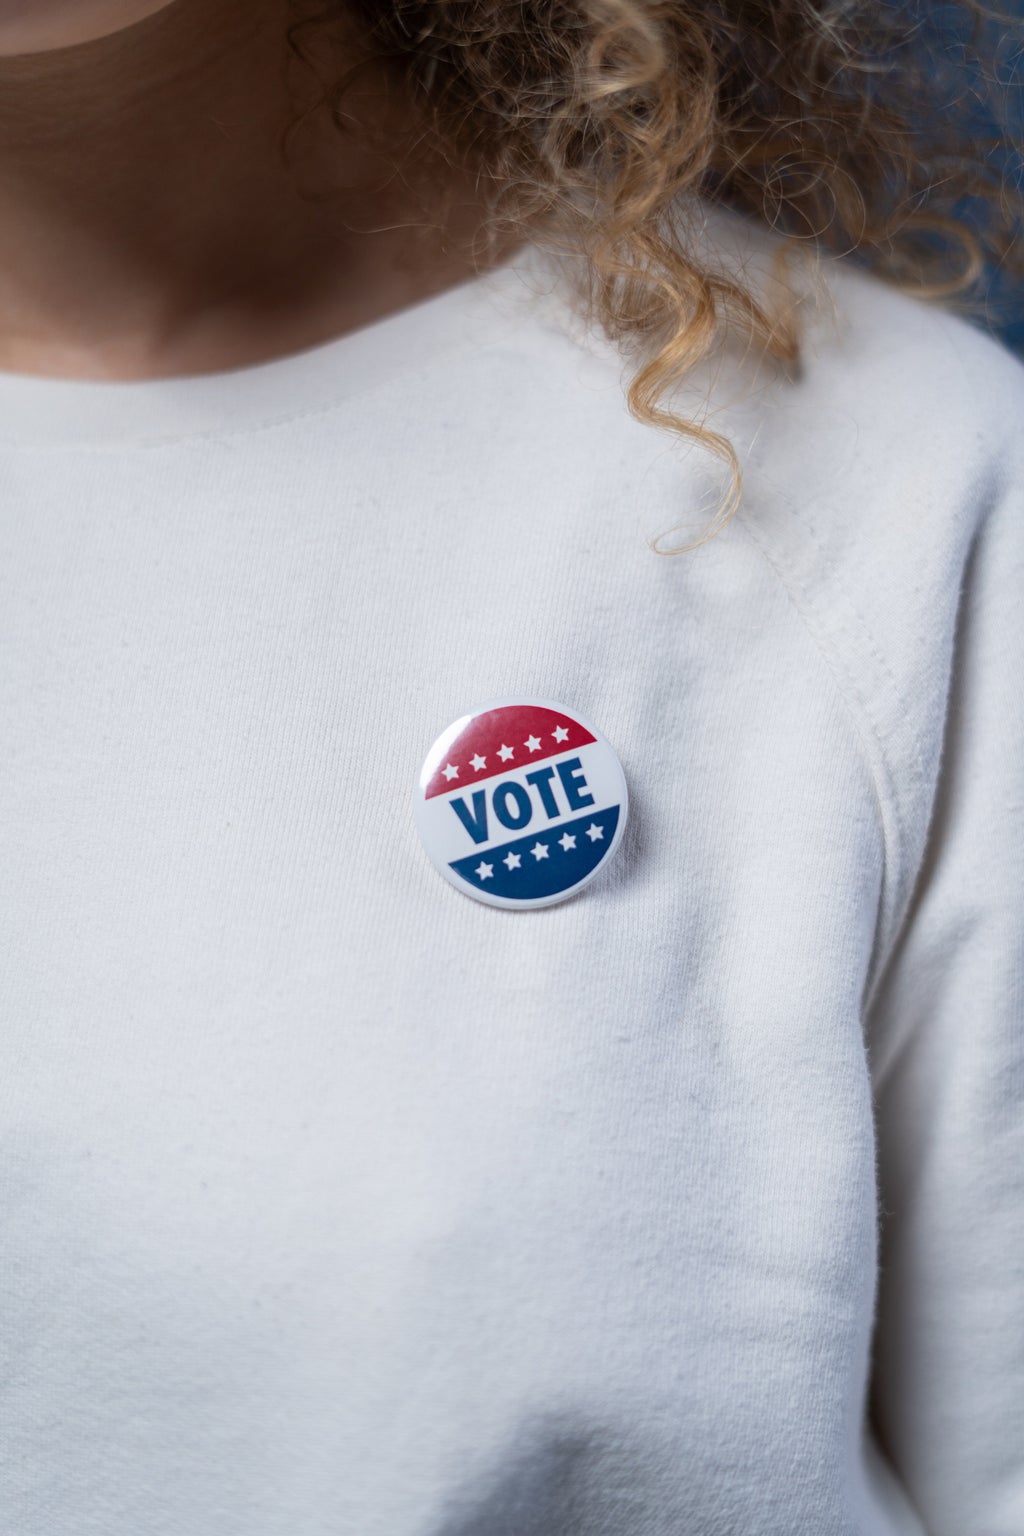 Vote Pin on a White Sweater